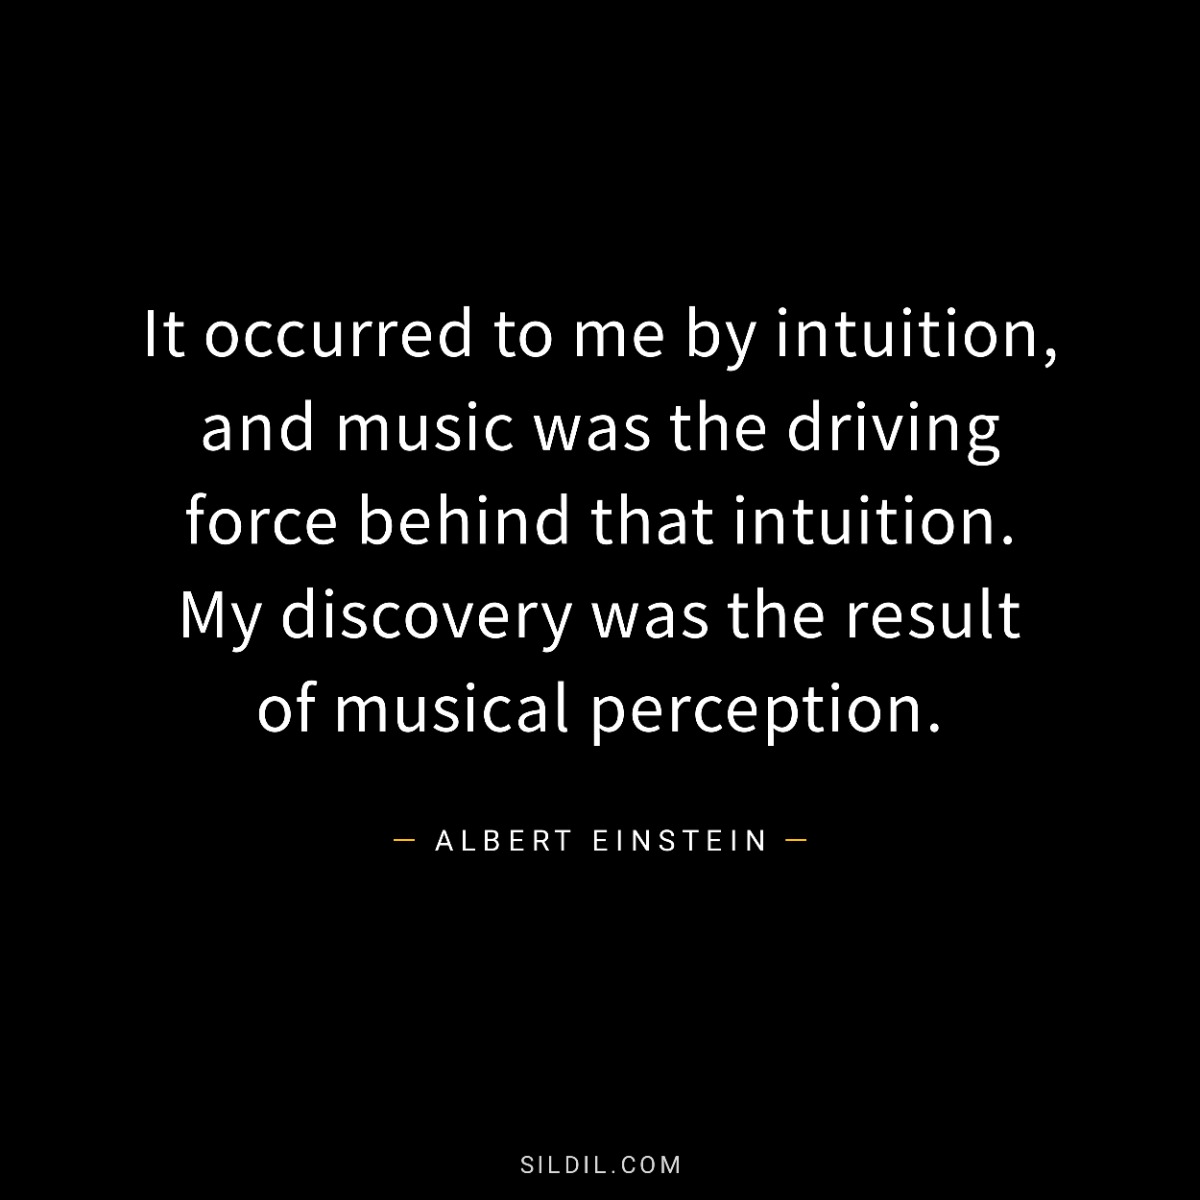 It occurred to me by intuition, and music was the driving force behind that intuition. My discovery was the result of musical perception.